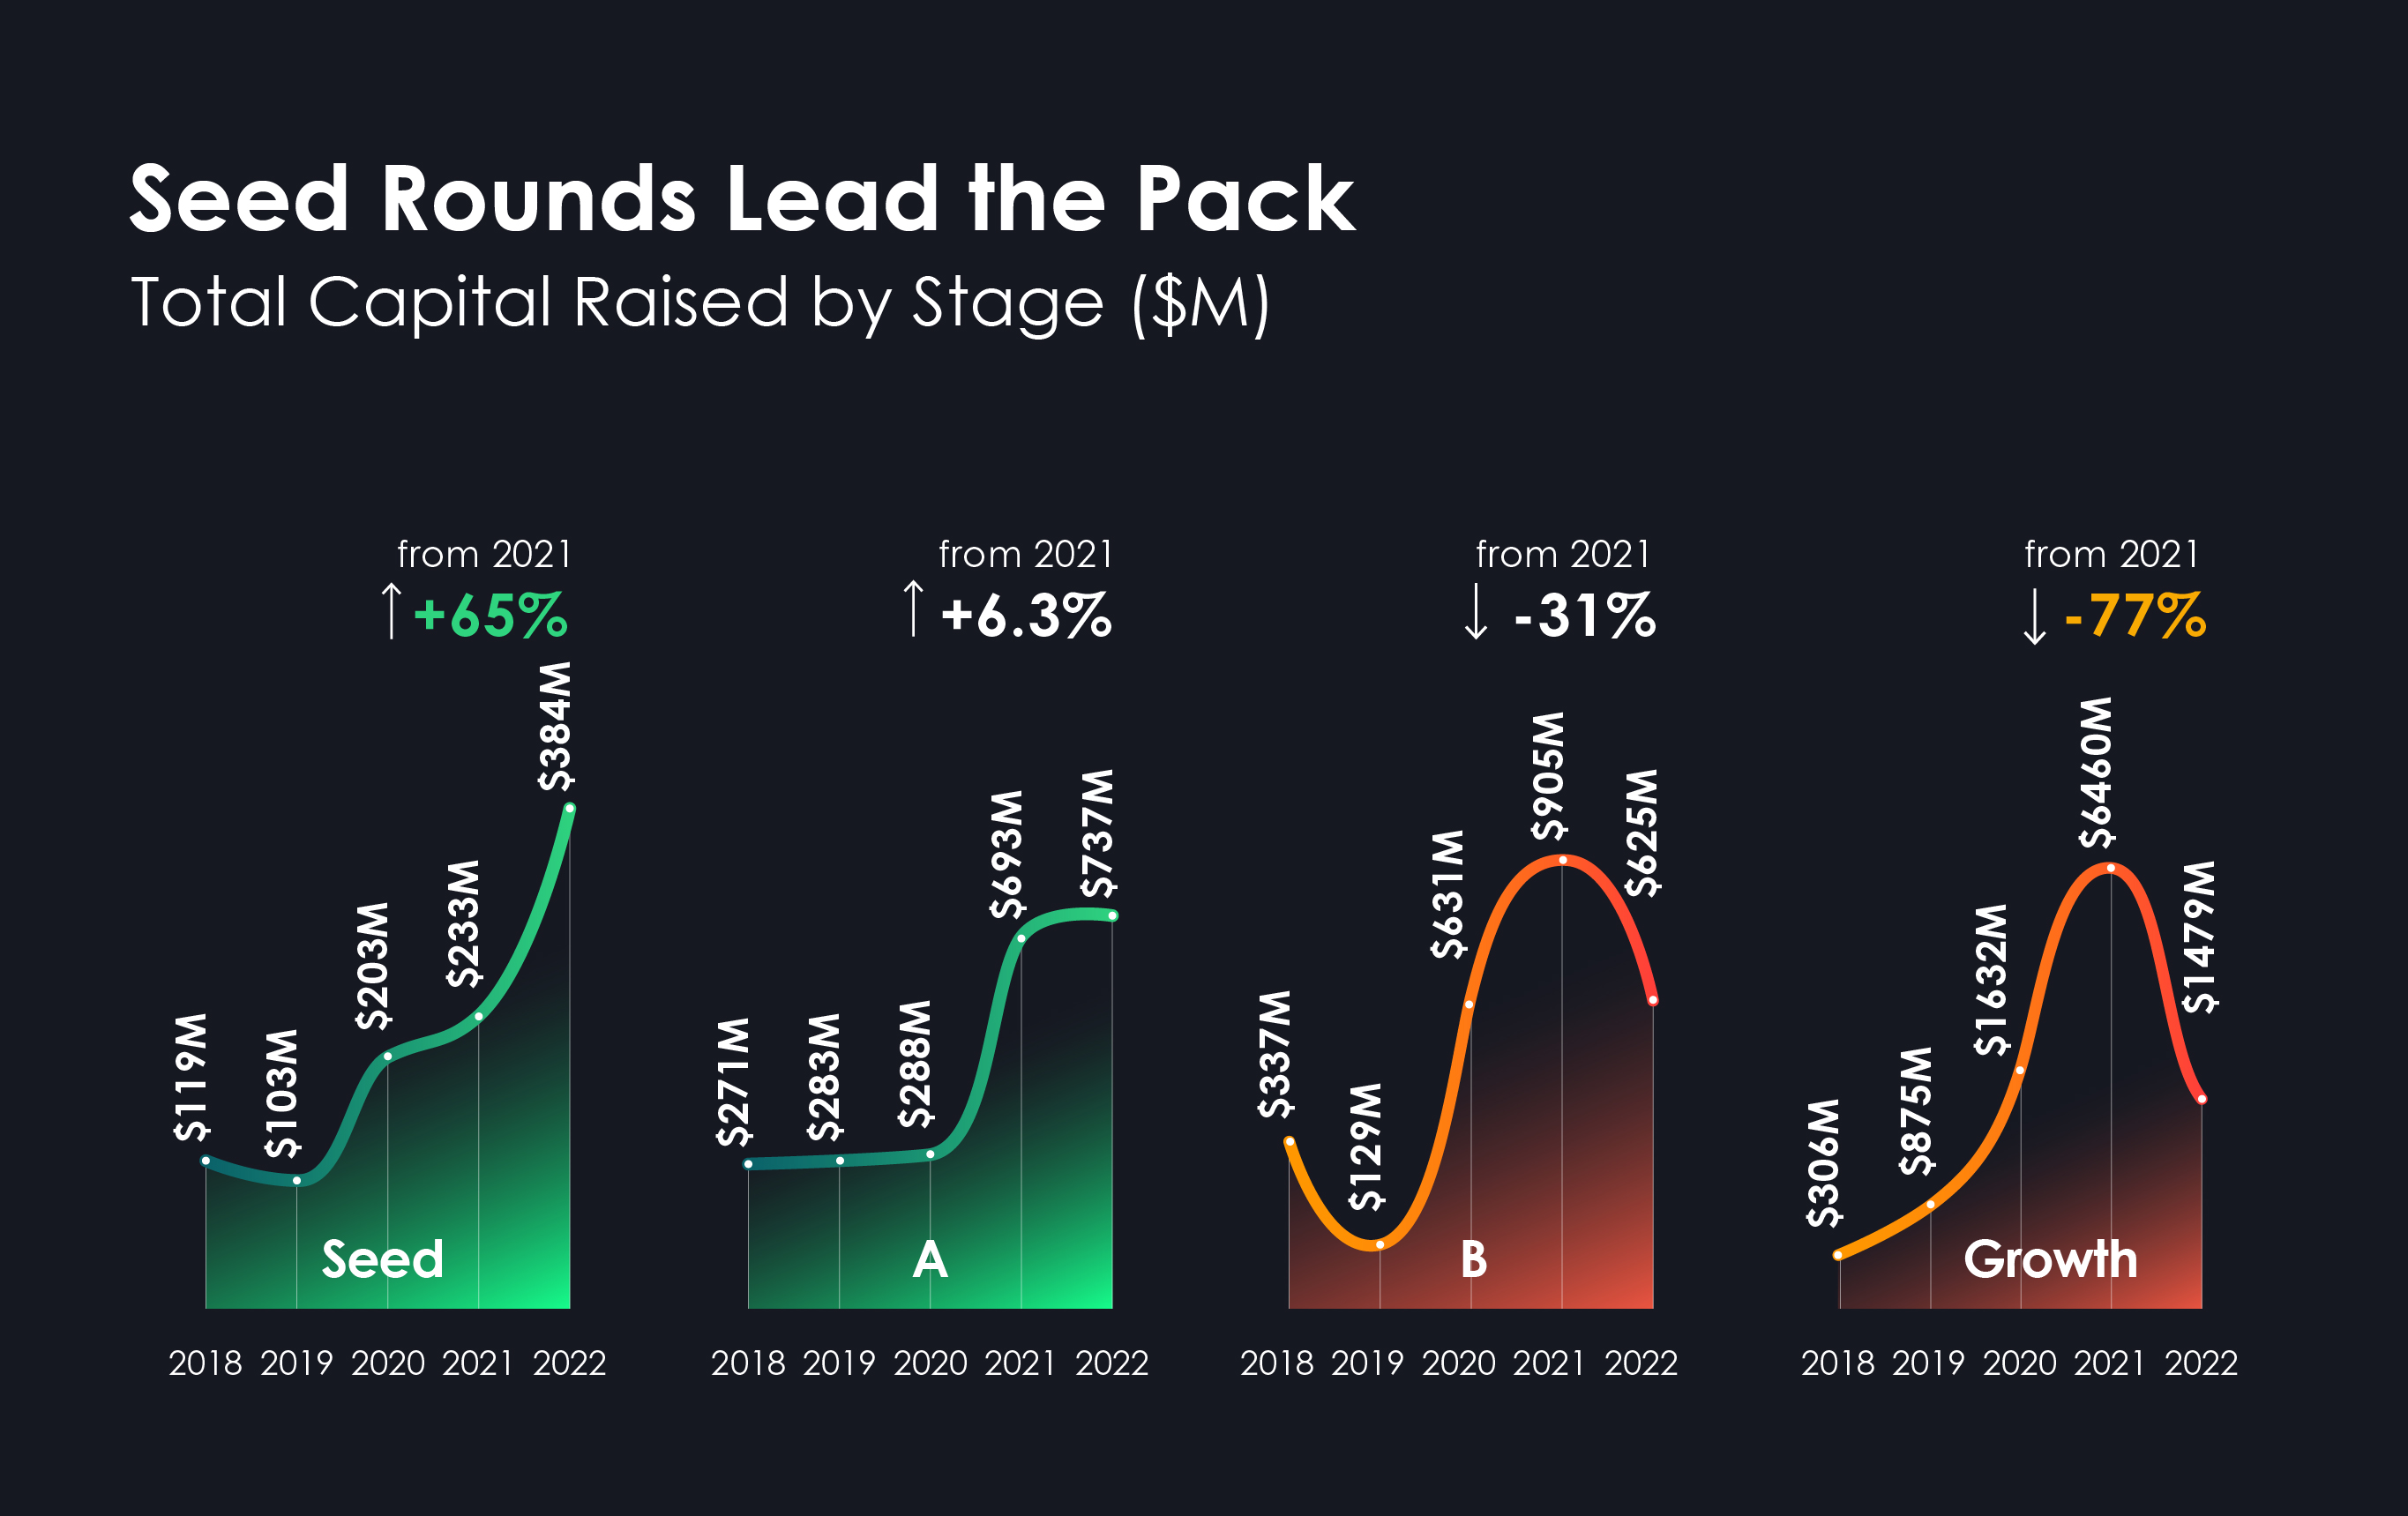 State of the Cyber Nation 2022: Seed rounds lead the pack